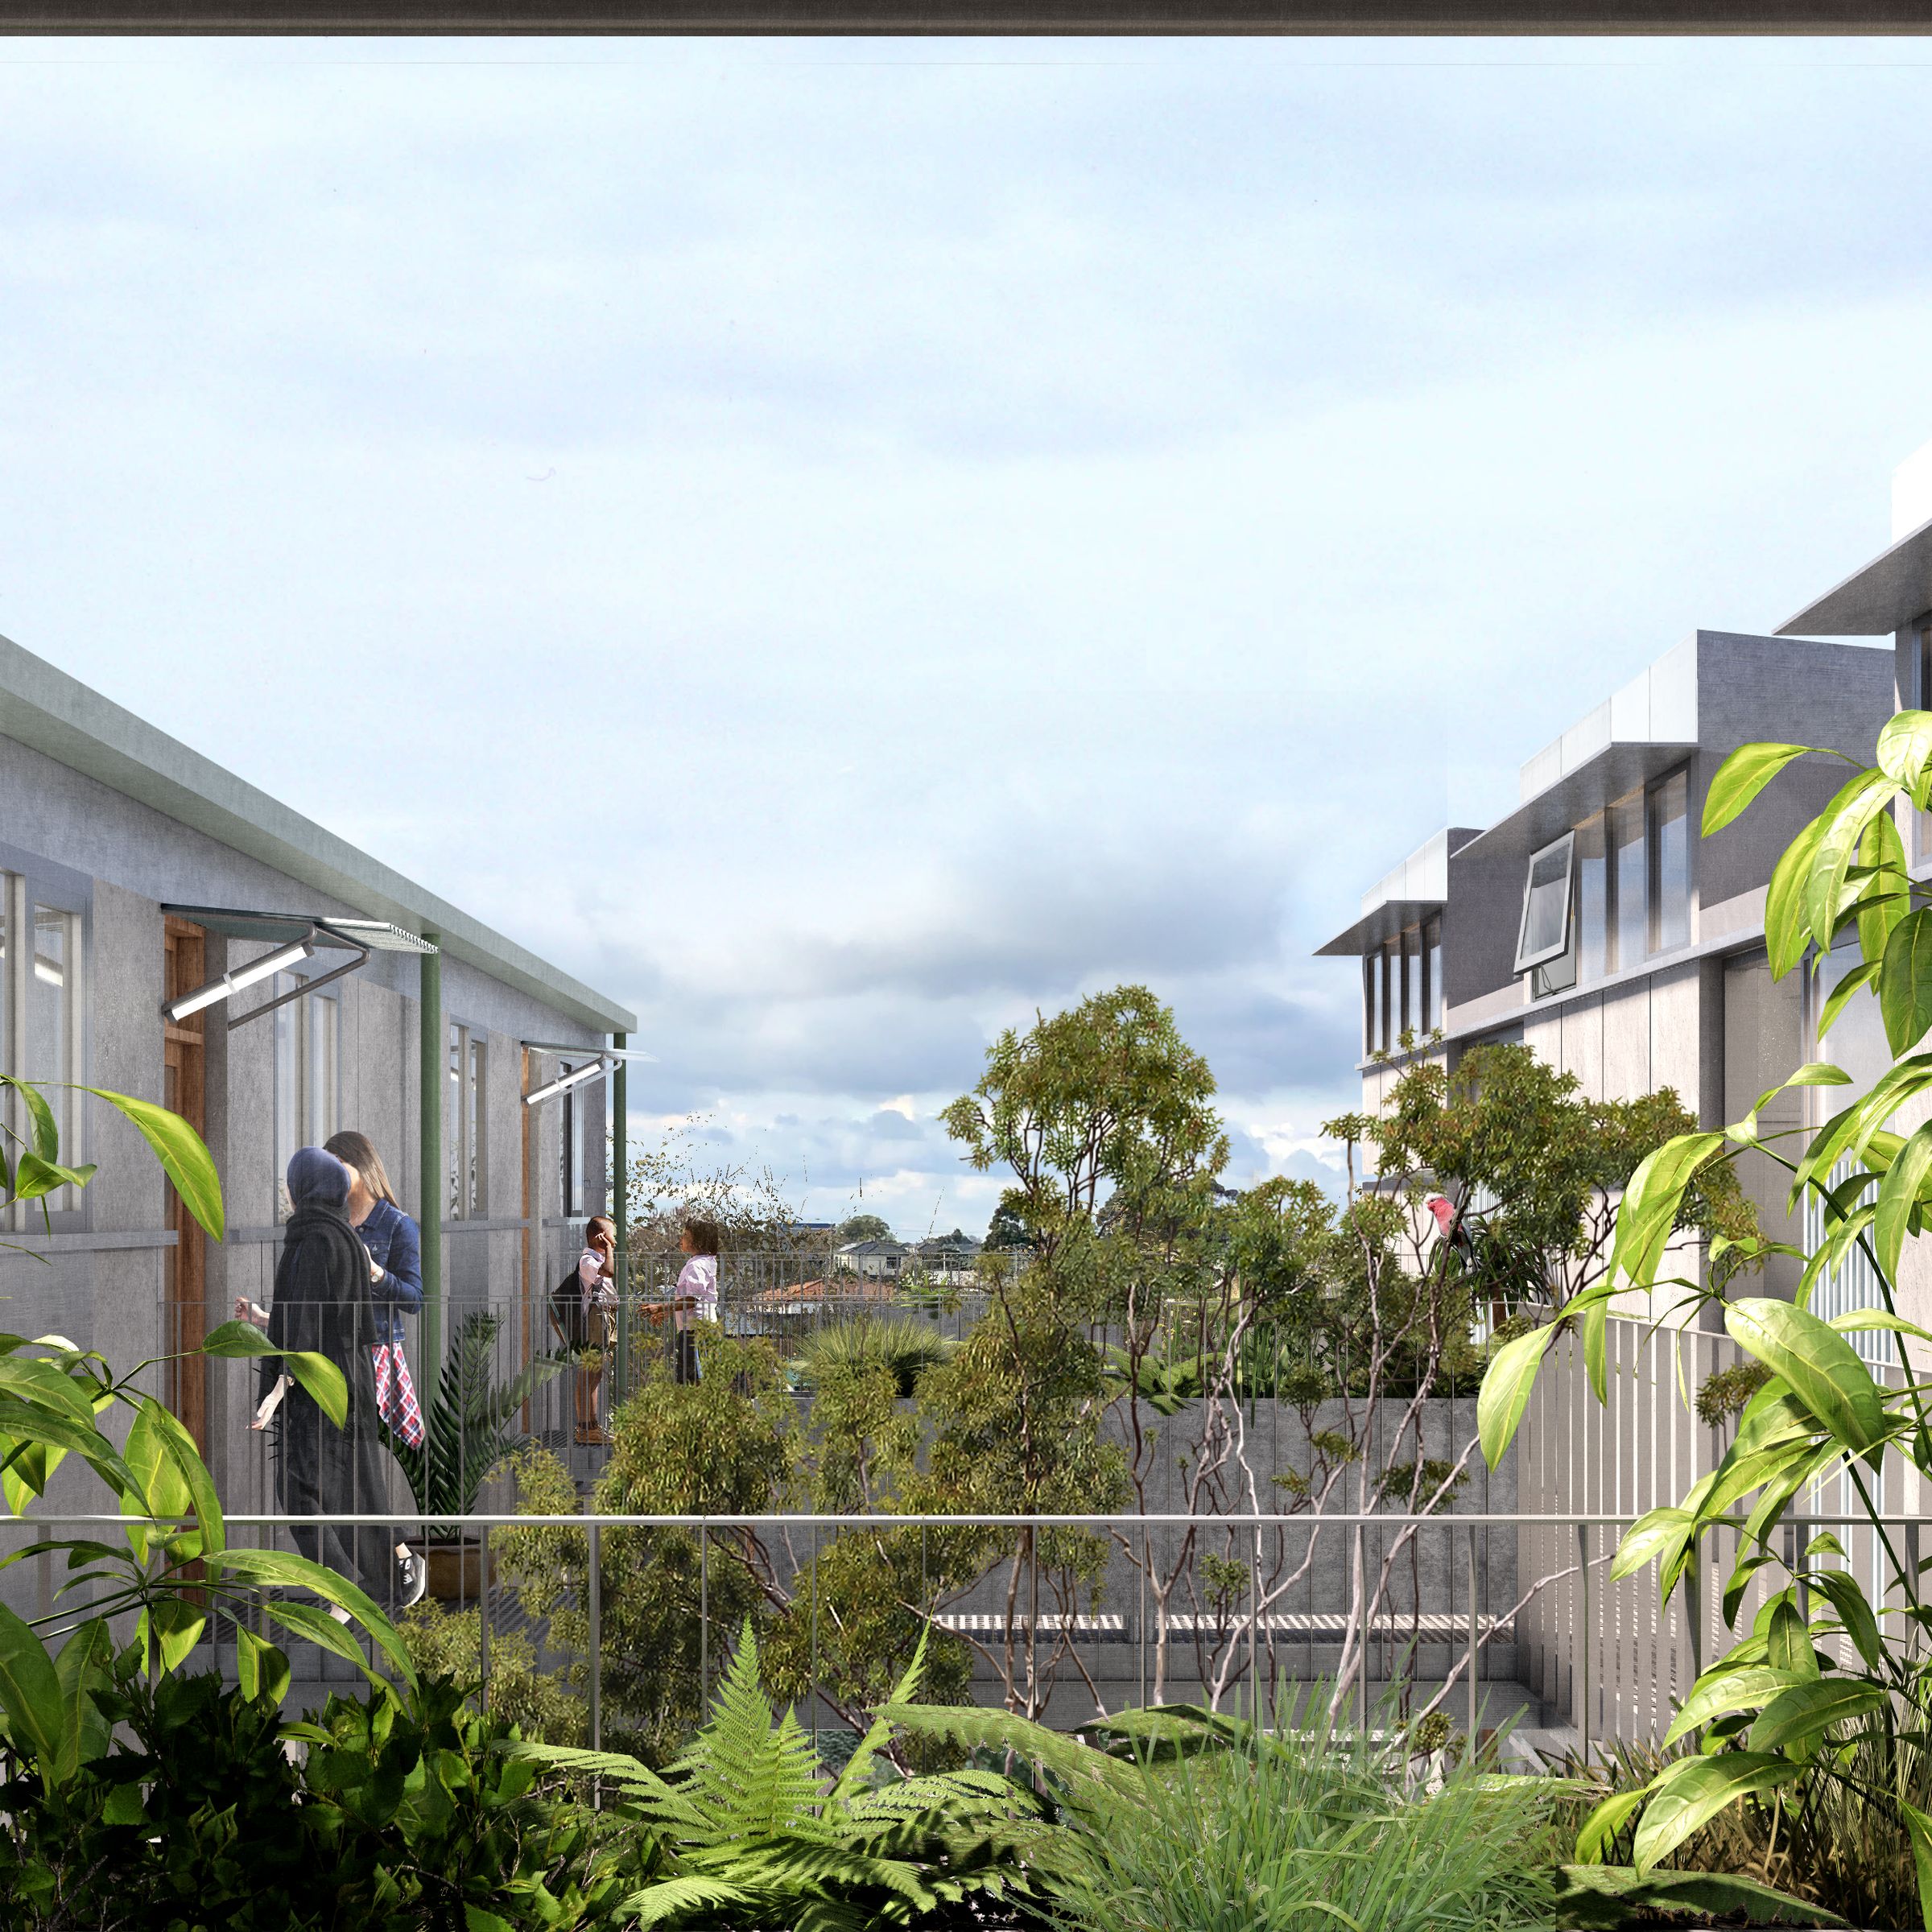 Achitectural visualisation of a Future Homes Exemplar Project by LIAN. The image shows the upper levels of a medium density apartment building with plants and an external corridor where people are talking.